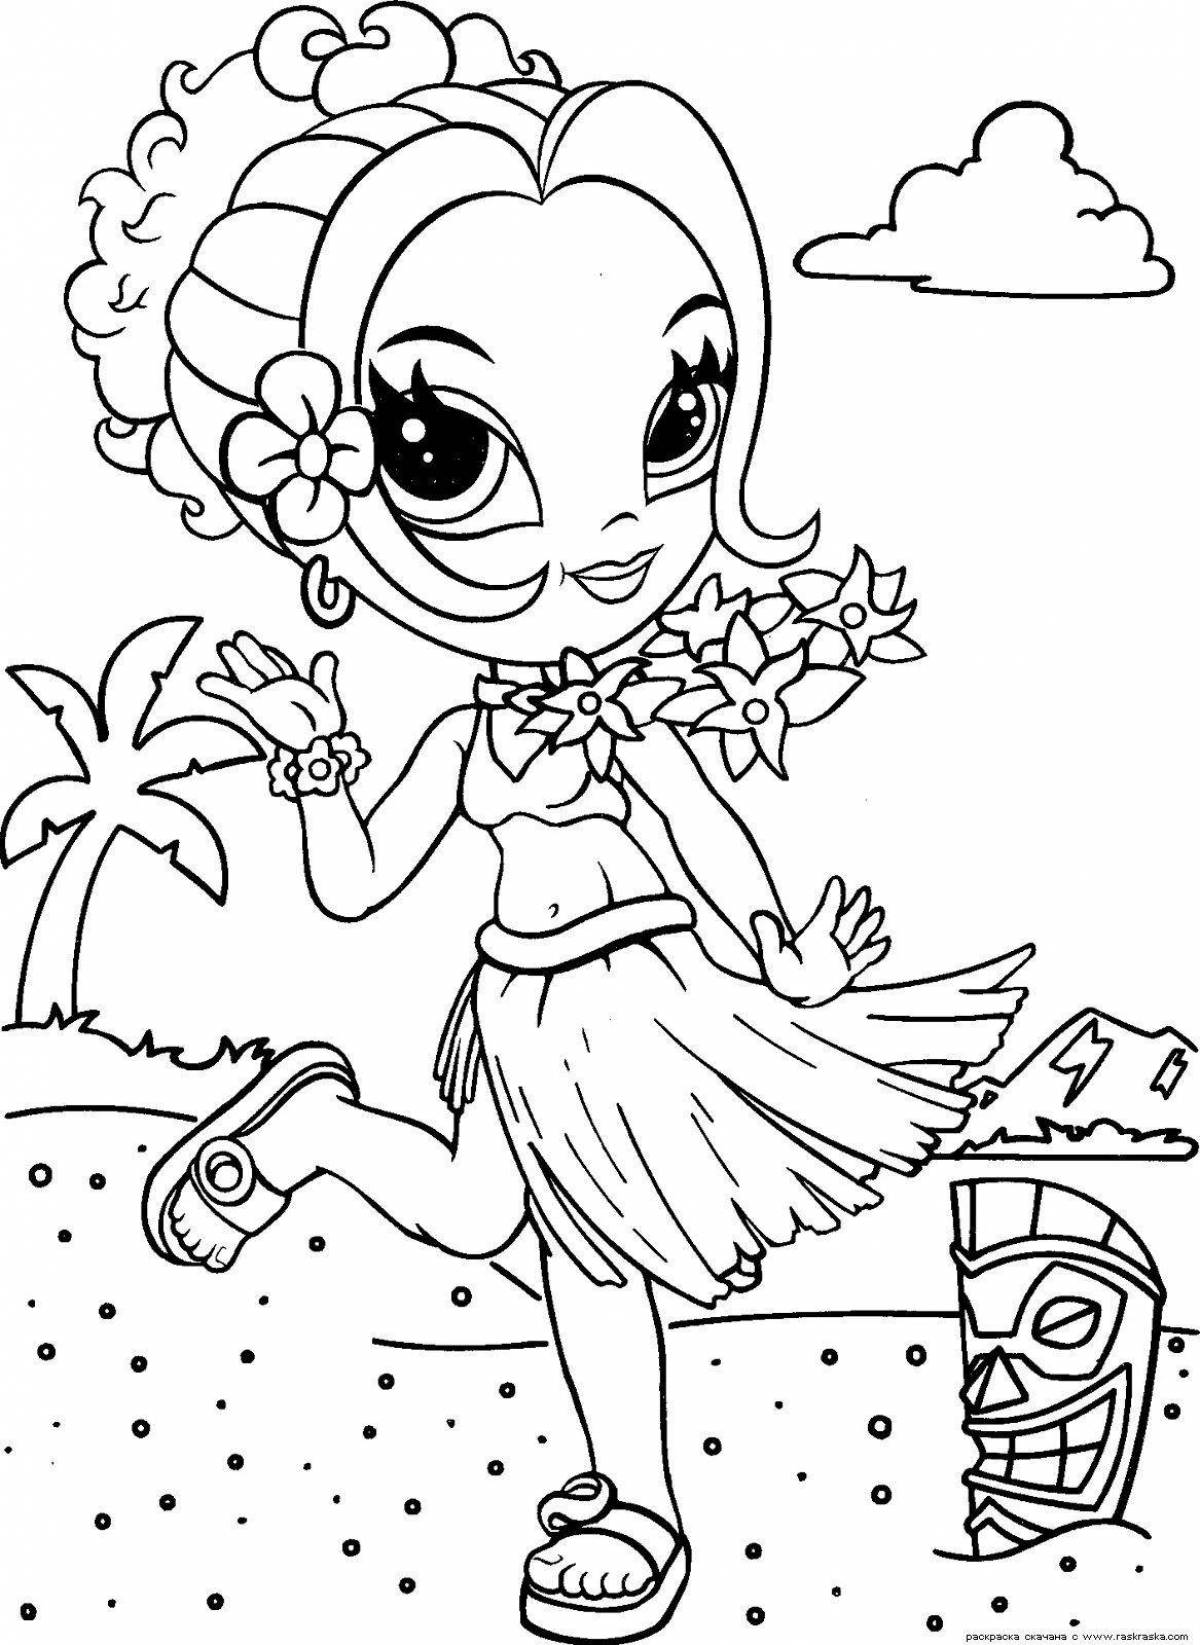 Fashion coloring, decorated